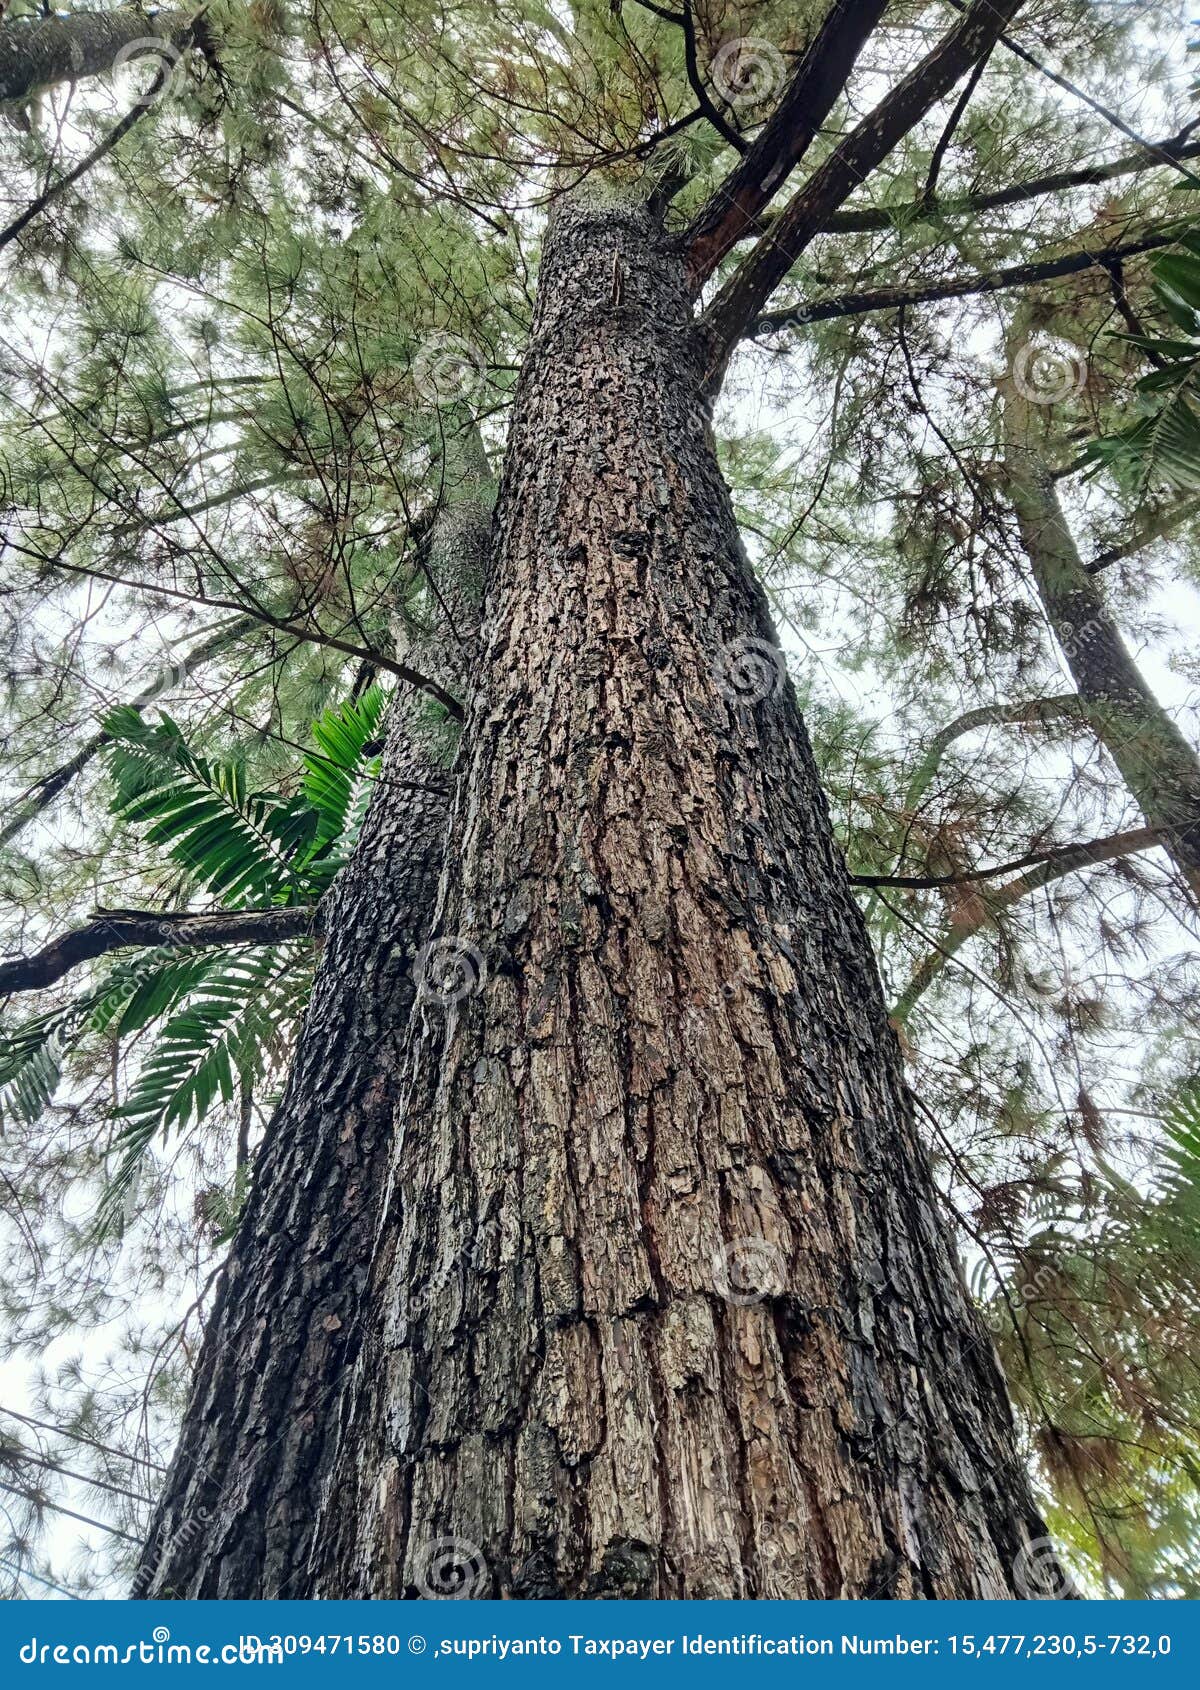 pine tree that is decades old